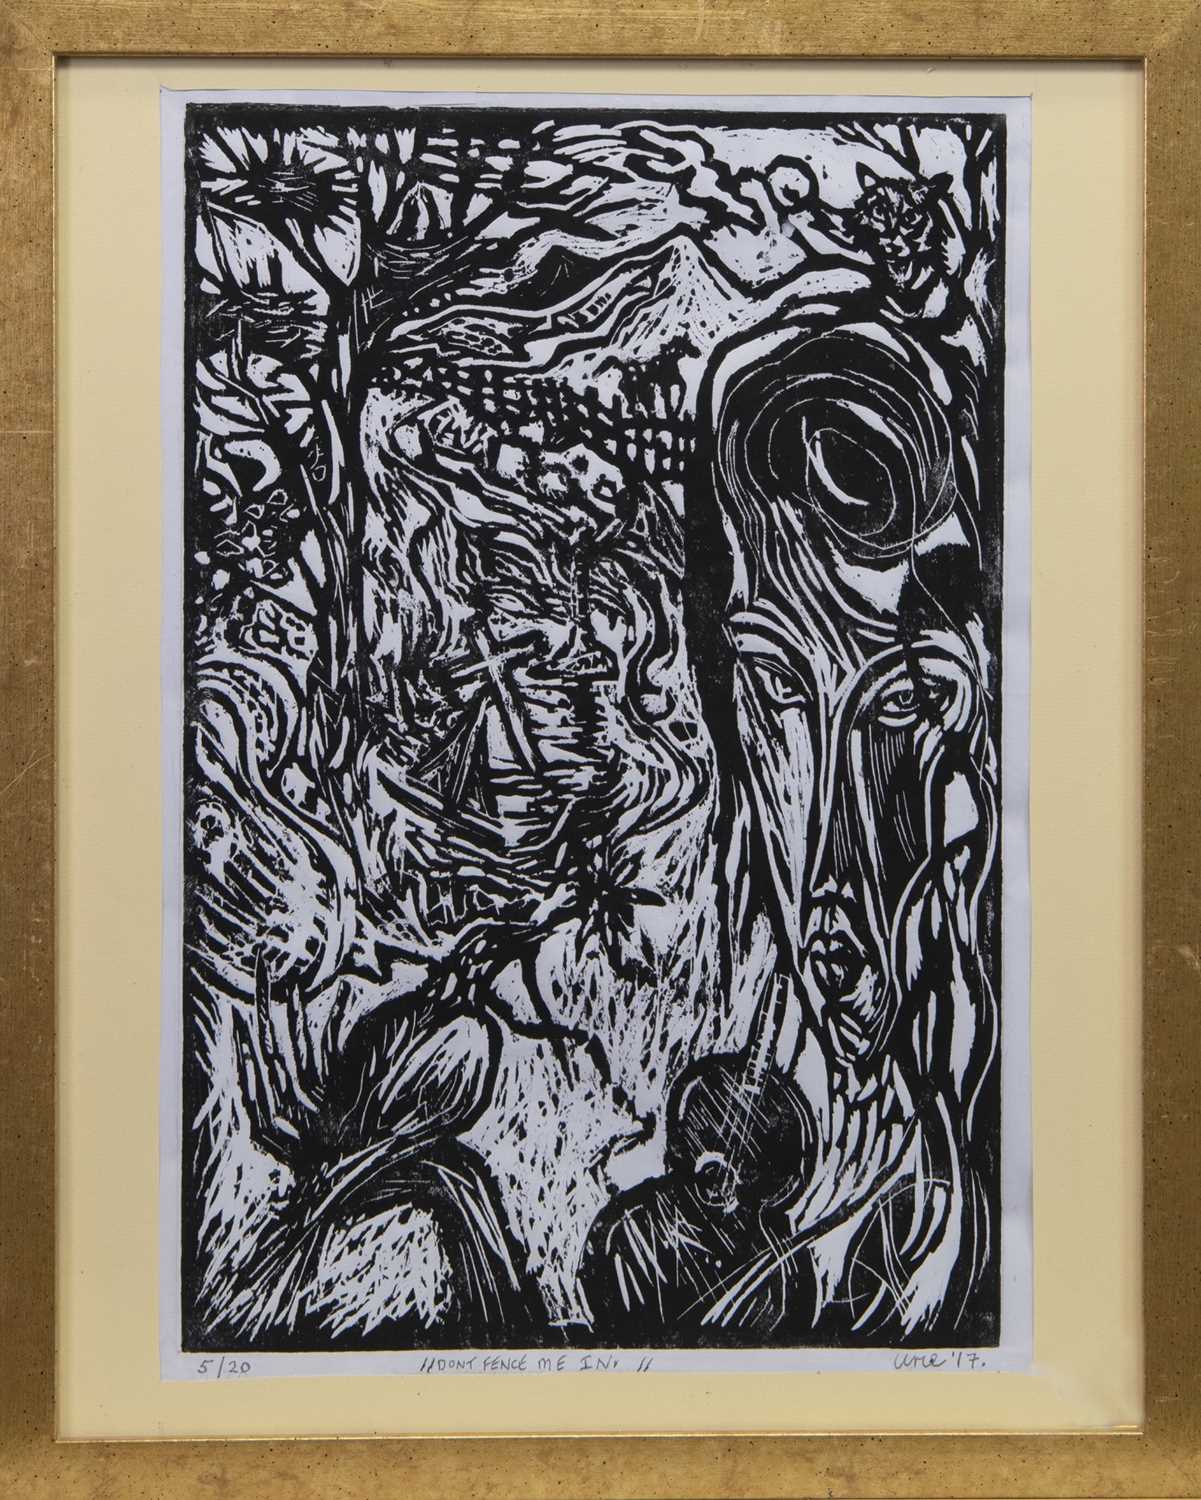 Lot 553 - DON'T FENCE ME IN, A WOODCUT BY JOSEPH URIE